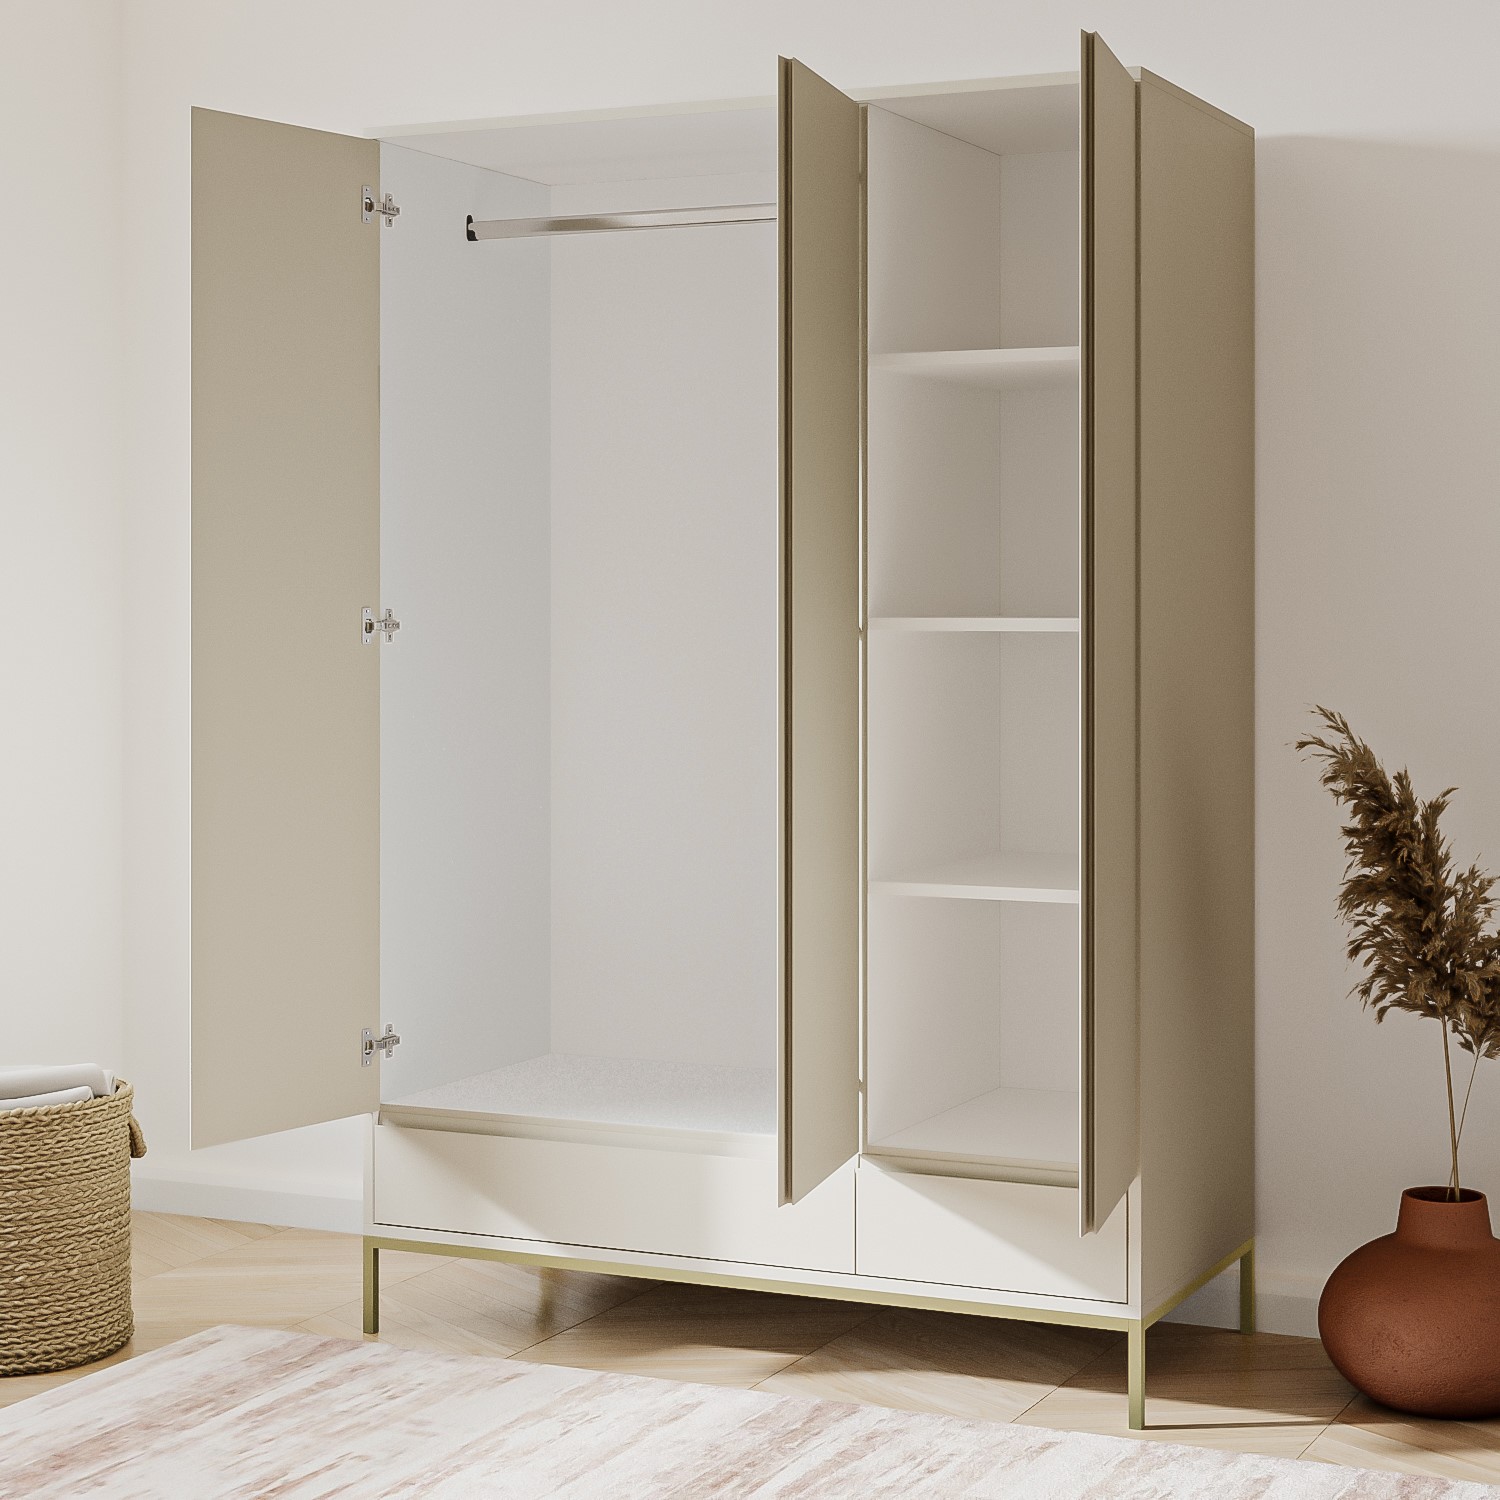 Read more about Modern beige 3 door triple wardrobe with drawers and shelves